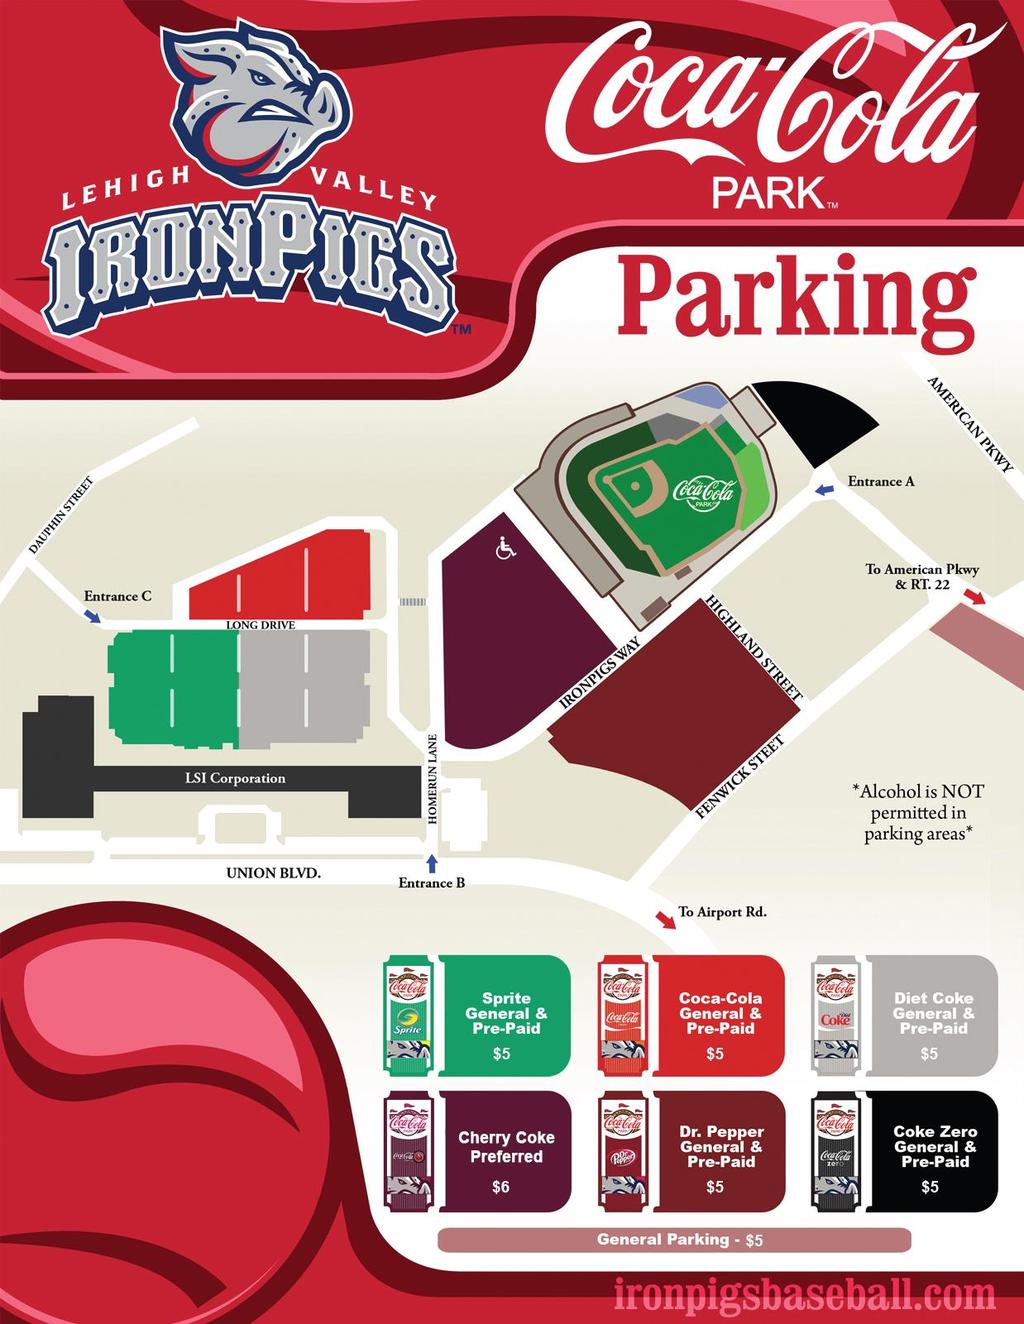 Appendix A Parking Map of Coca-Cola Park When arriving at Coca-Cola Park please attempt to park in the Coke Zero lot since this will be the closest parking space to the overnight area.